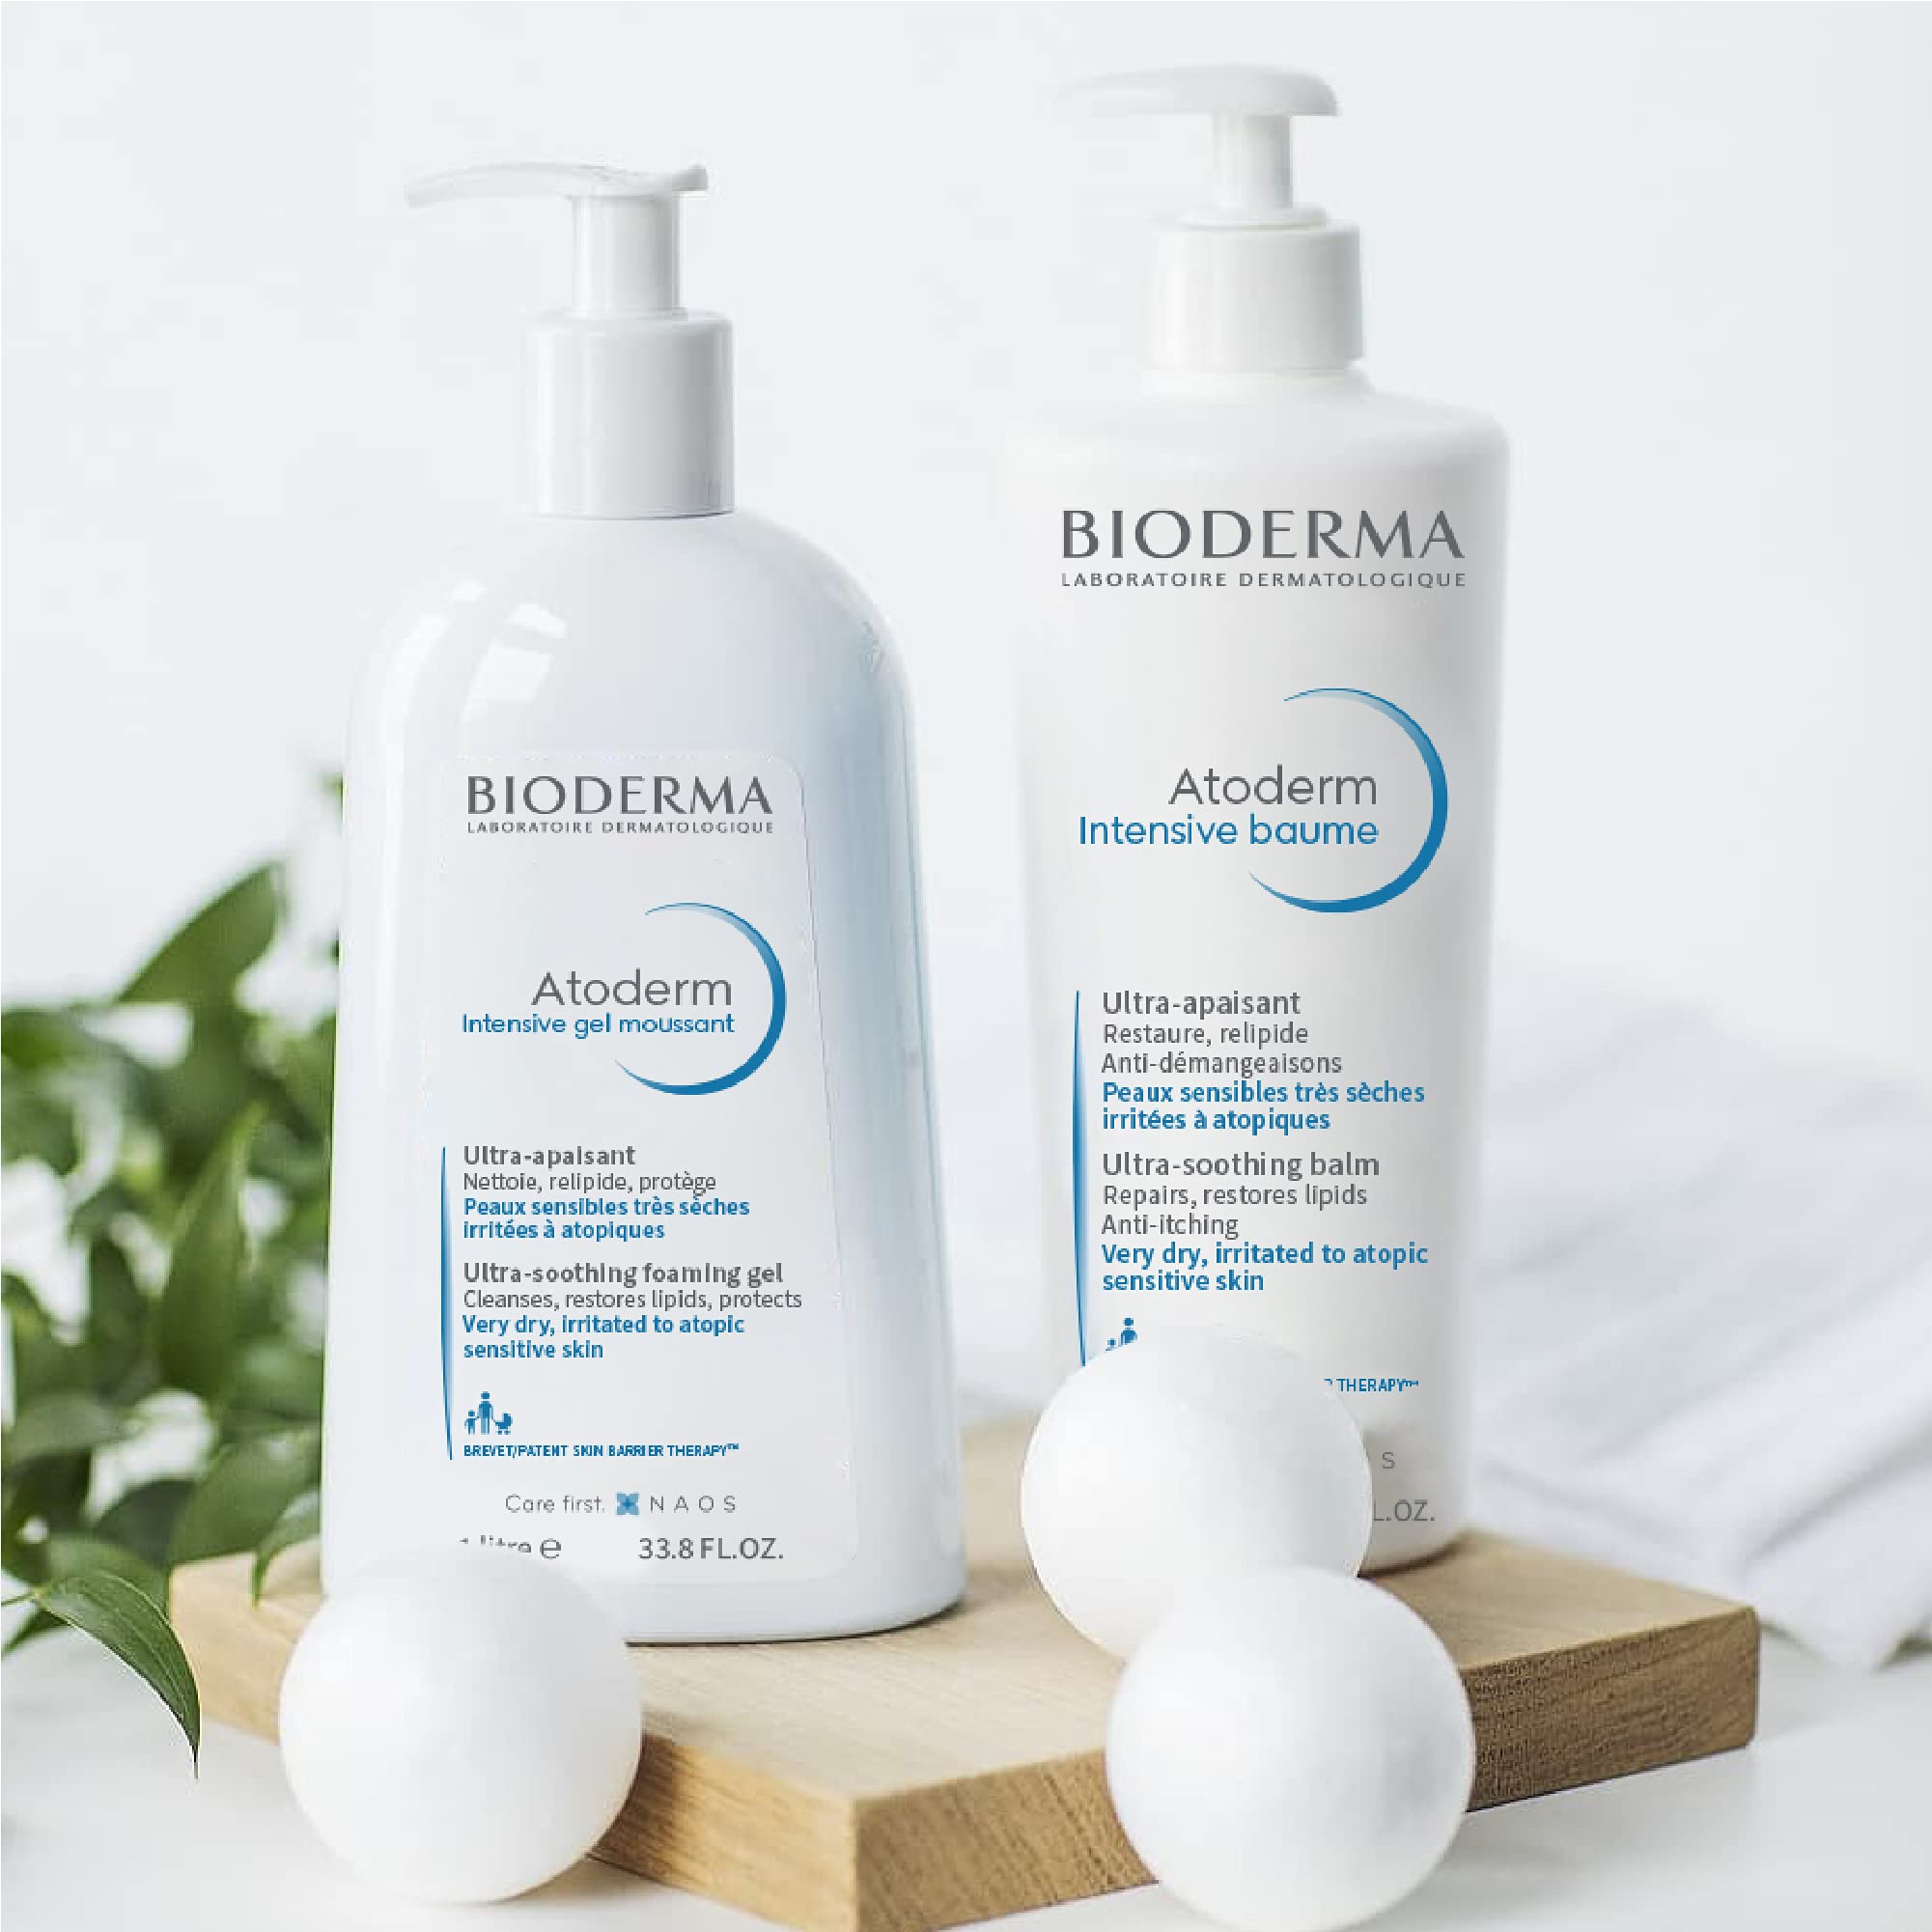 Bioderma - Atoderm - Intensive Gel Moussant - Ultra Rich Foaming Cleansing Gel - Anti-Itching - Body Wash for Very Dry to Atopic Sensitive Skin